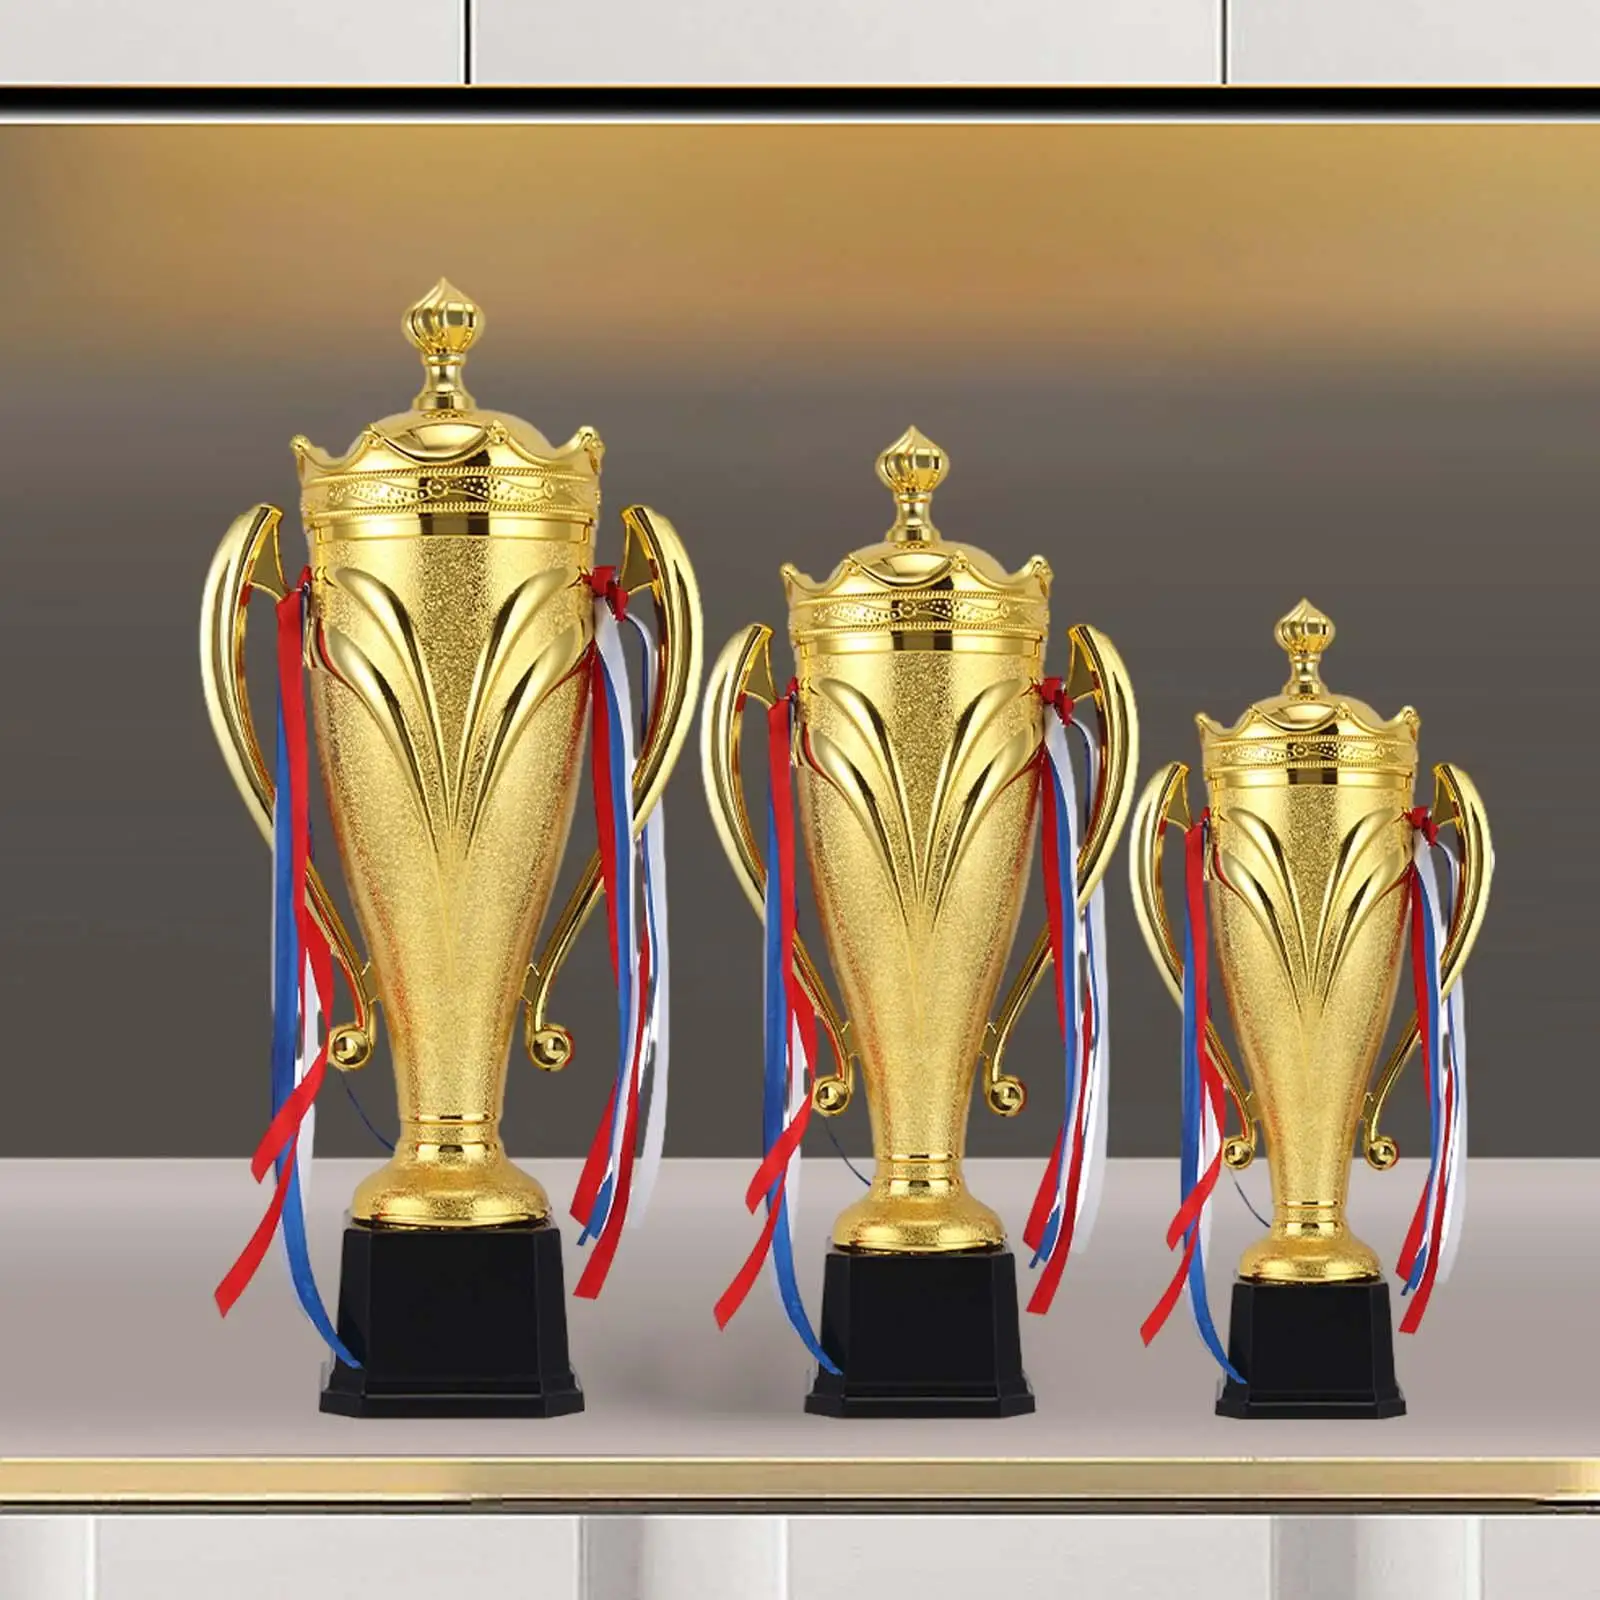 Child Trophy Cups PP Award Trophies Cup Versatile Smooth Surface Rewards Prizes Decorative for Games Awards Ceremonies